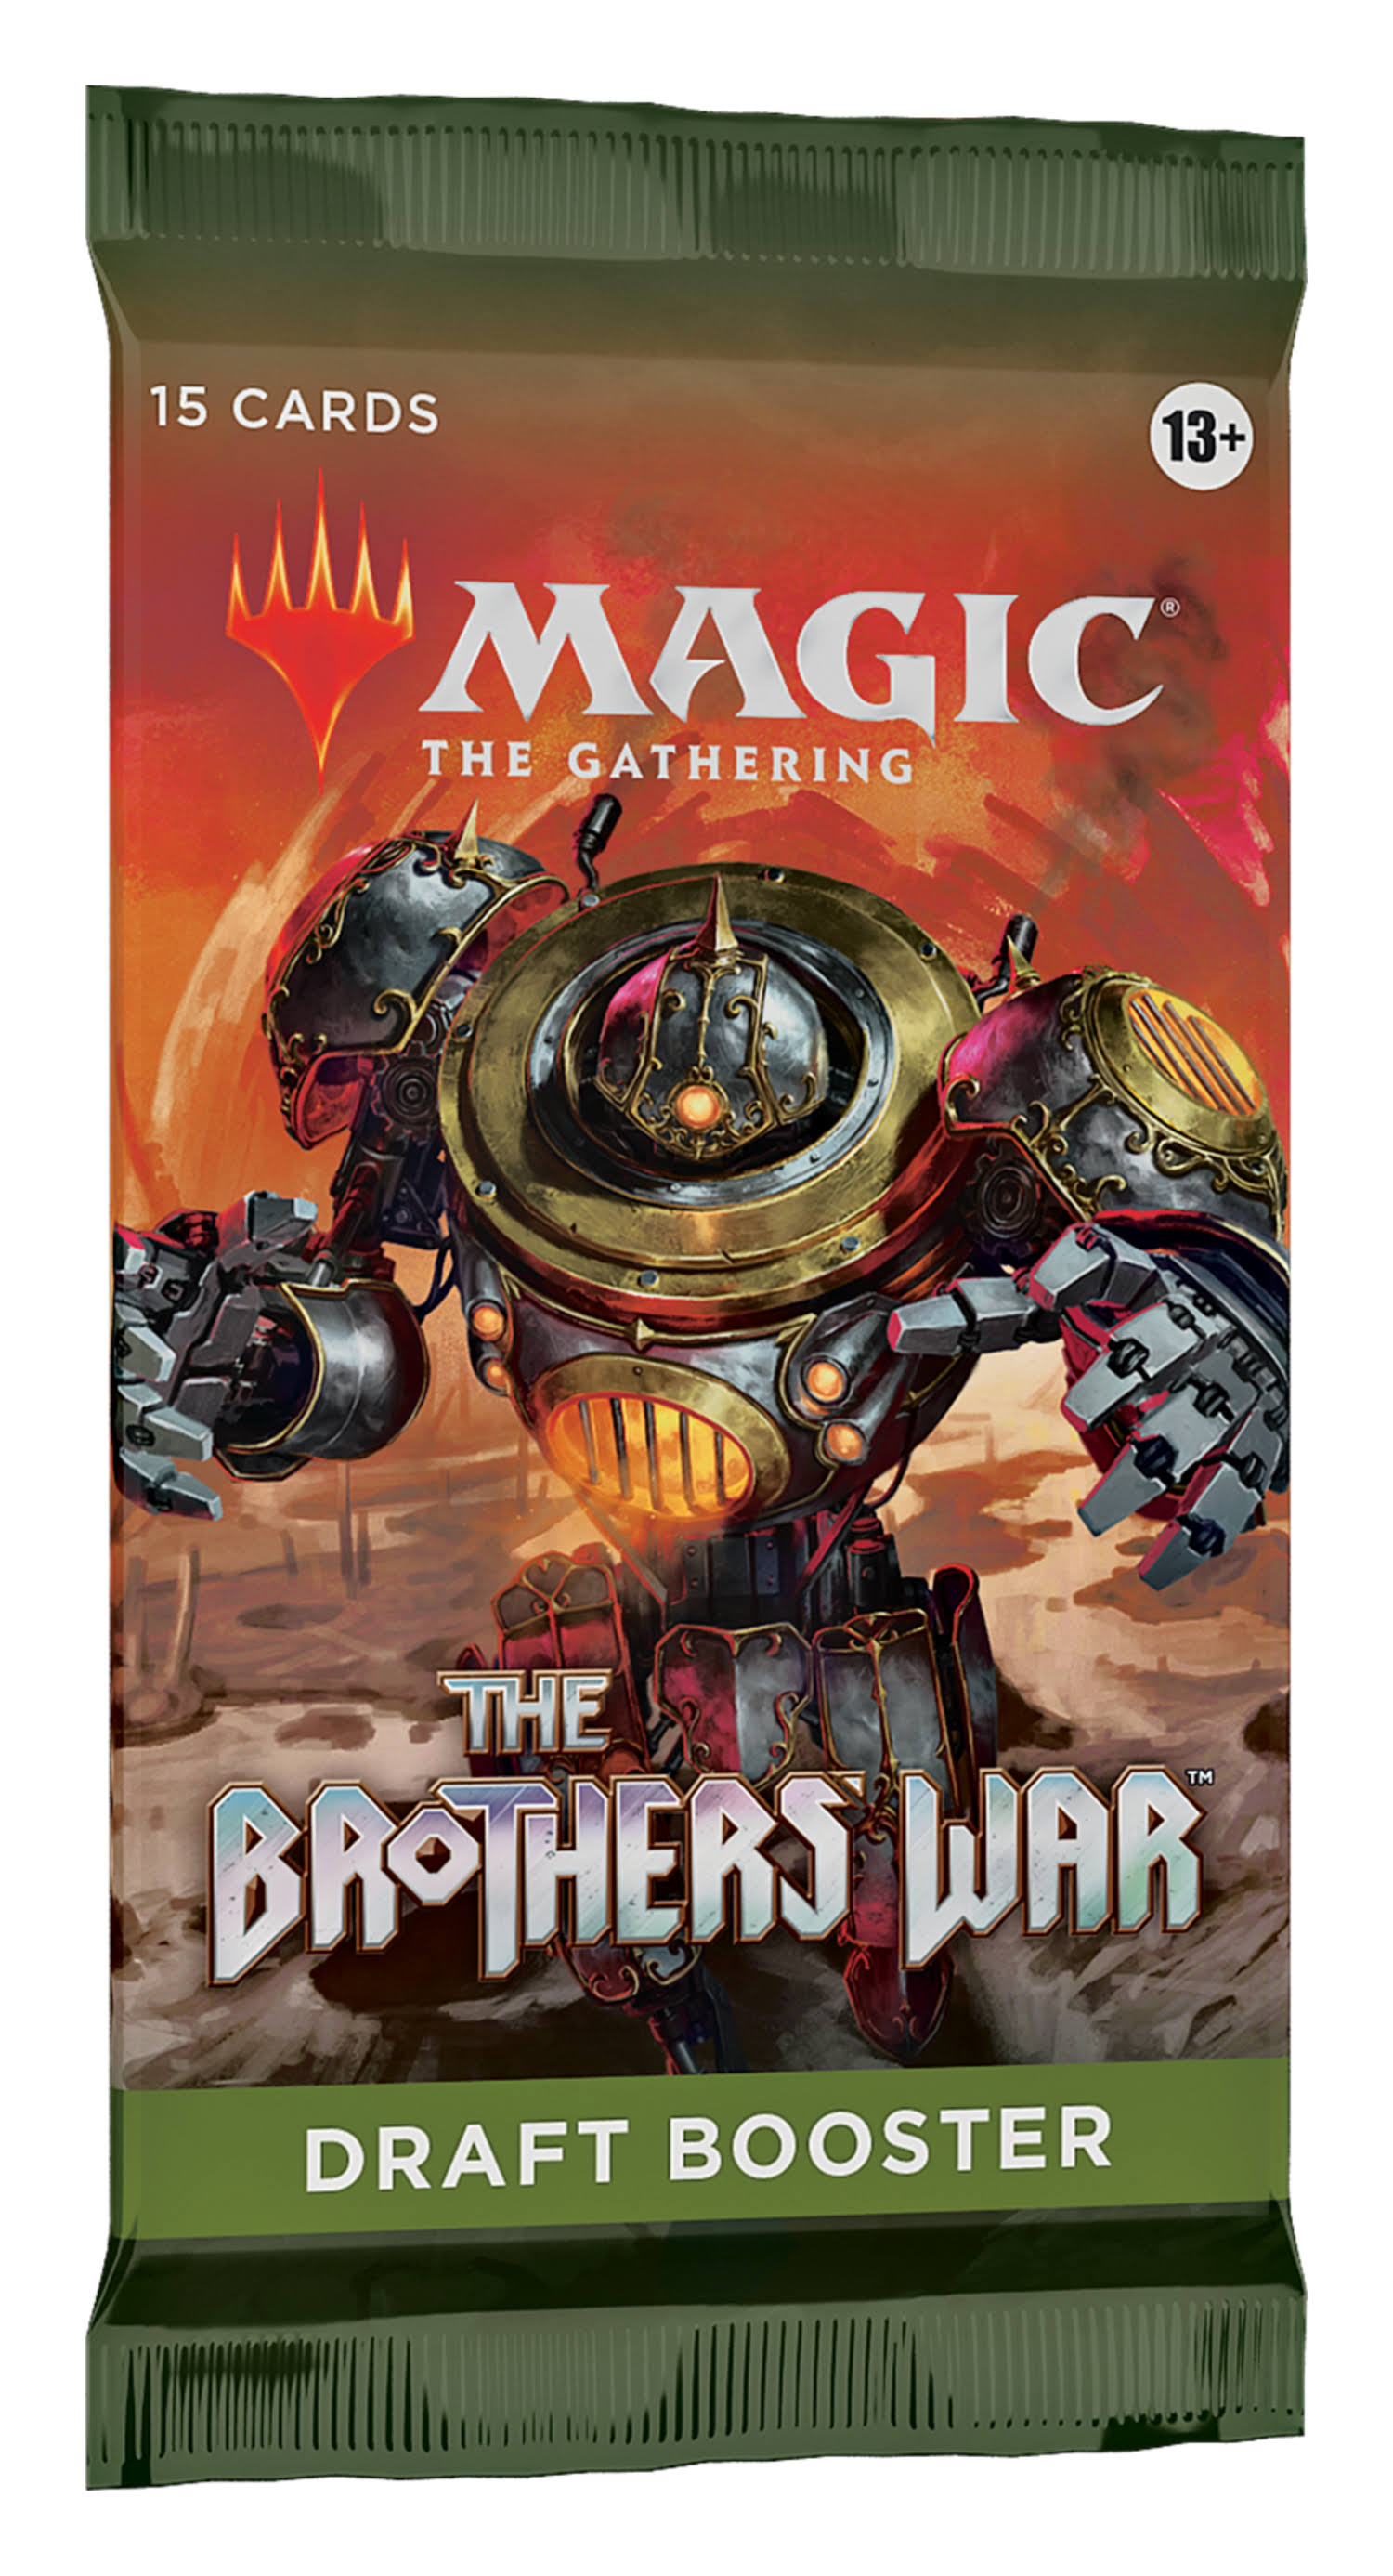 Magic The Gathering - The Brothers' War - Draft Booster Pack